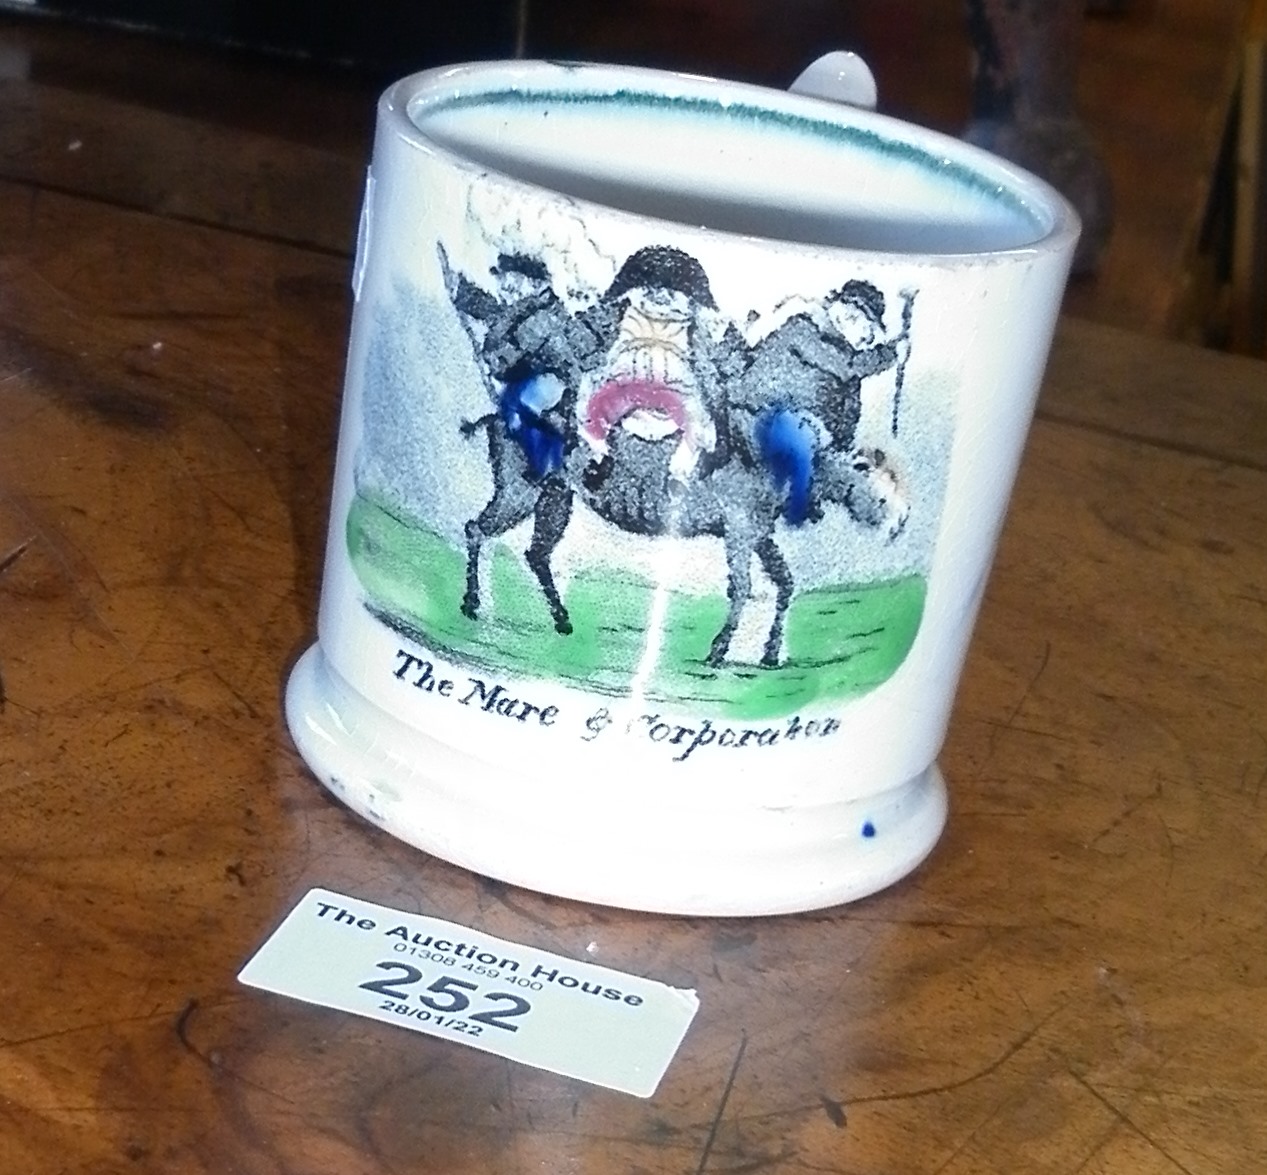 19th c. Staffordshire transfer printed mug with picture of "The Mare and Corporation"